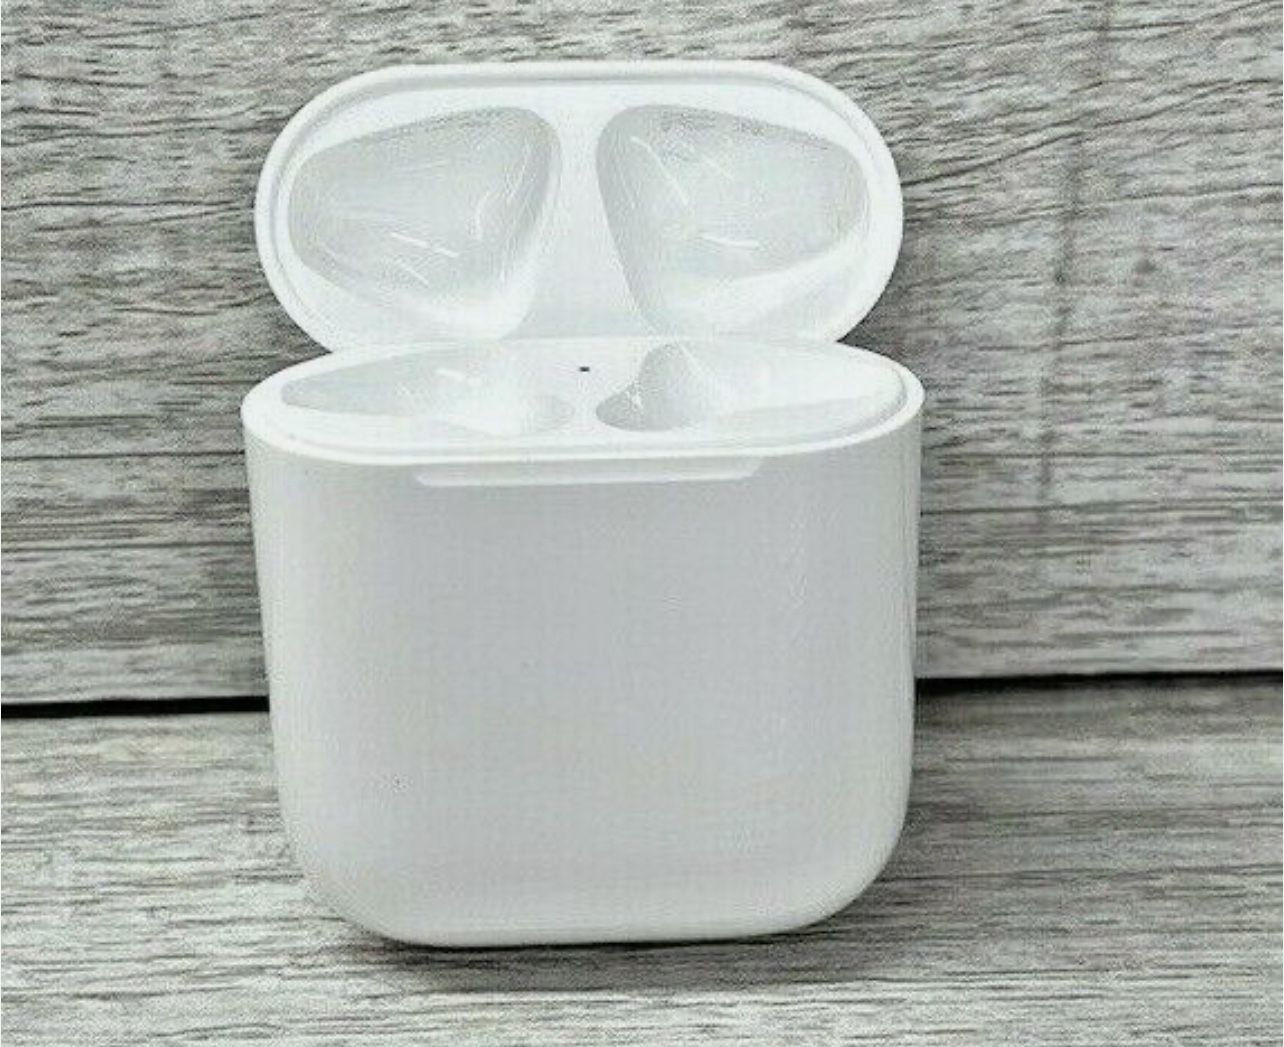 Apple AirPods 2nd Generation Charging Case White